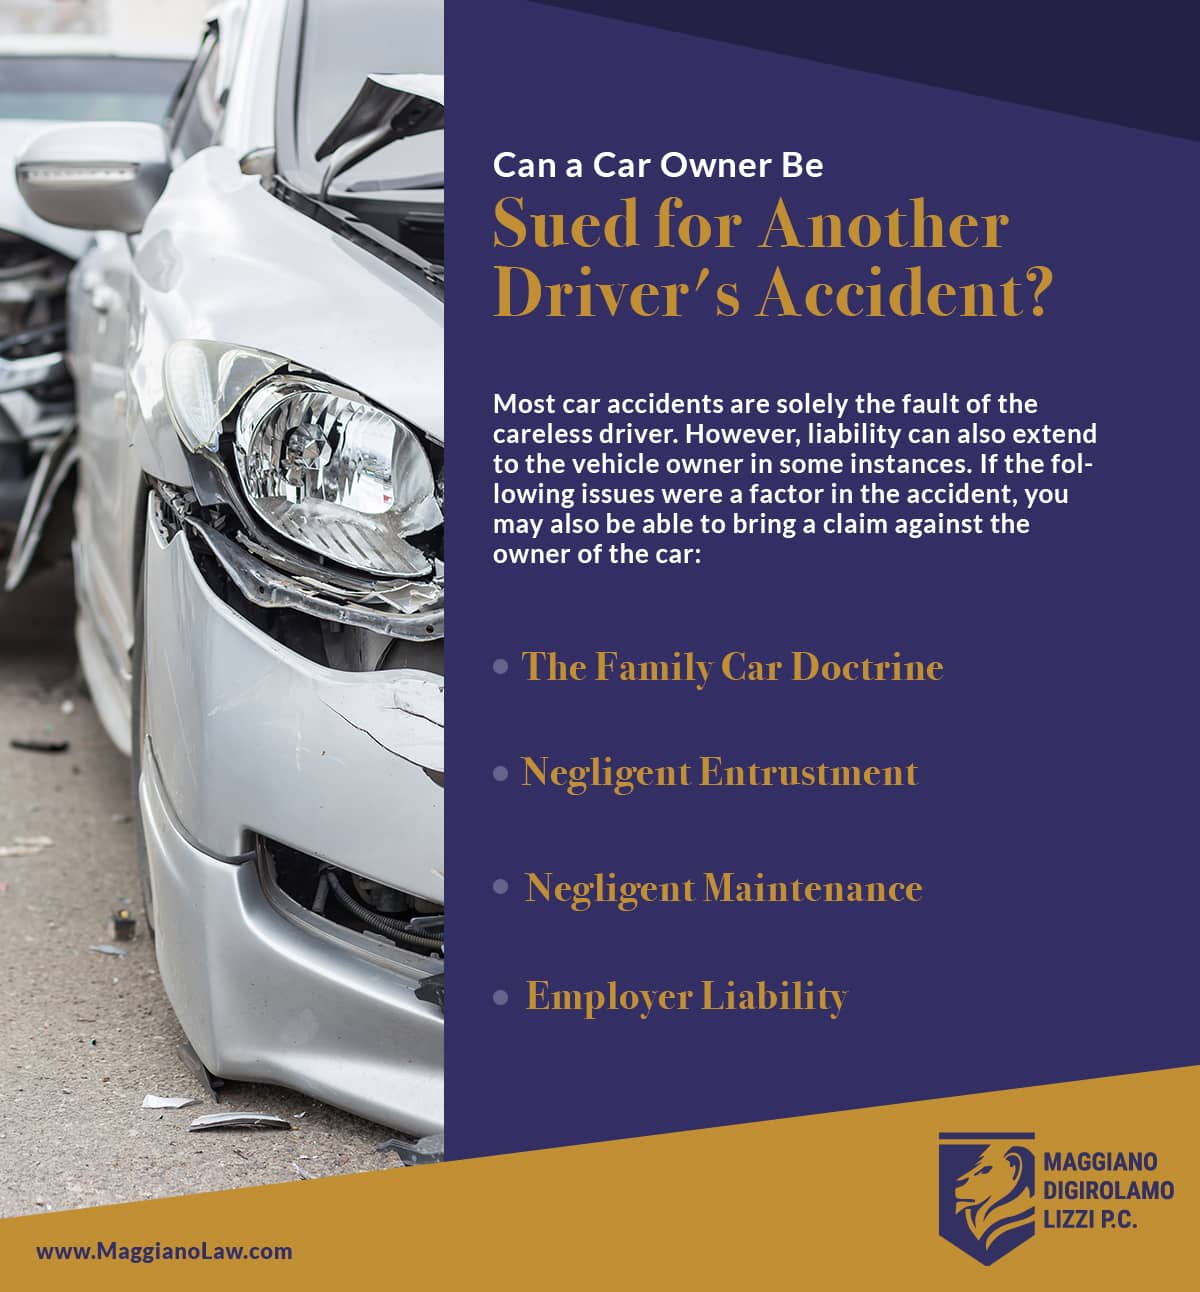 Suing the Driver vs. the Owner for a Car Accident | Maggiano, DiGirolamo and Lizzi